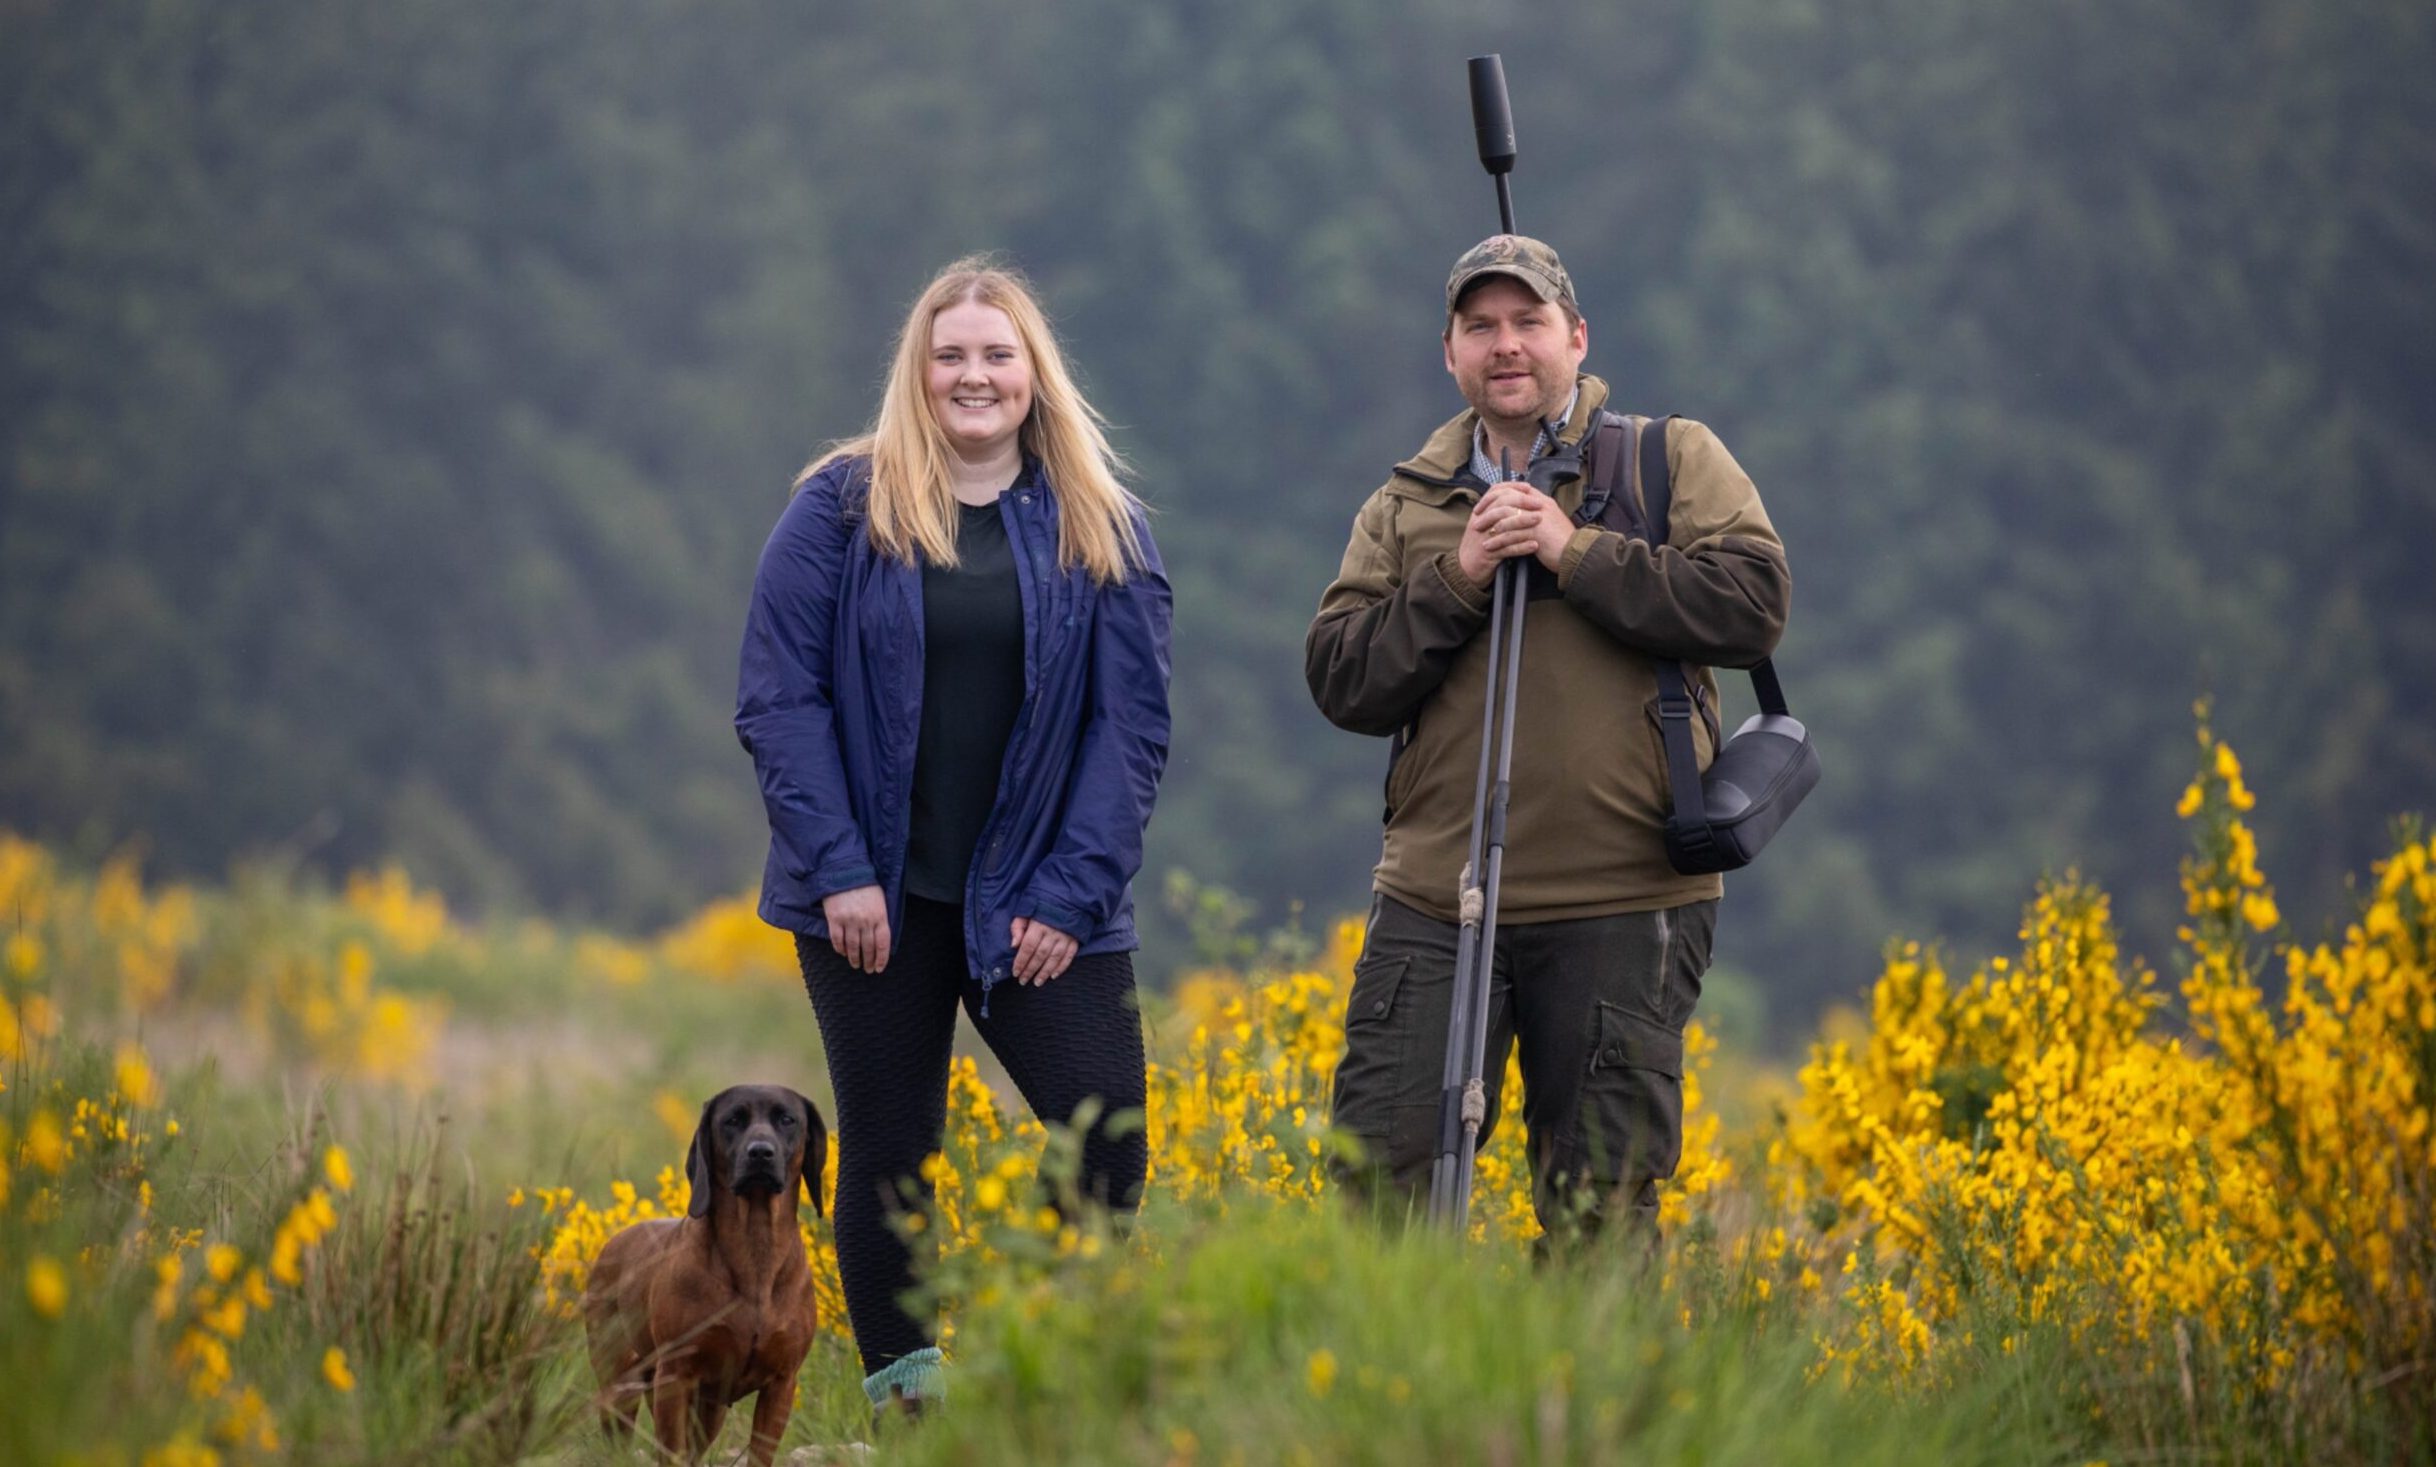 Food and drink writer Joanna Bremner joined Tom Rust, a Perthshire deer stalker, for a day. Image: Kenny Smith/DC Thomson